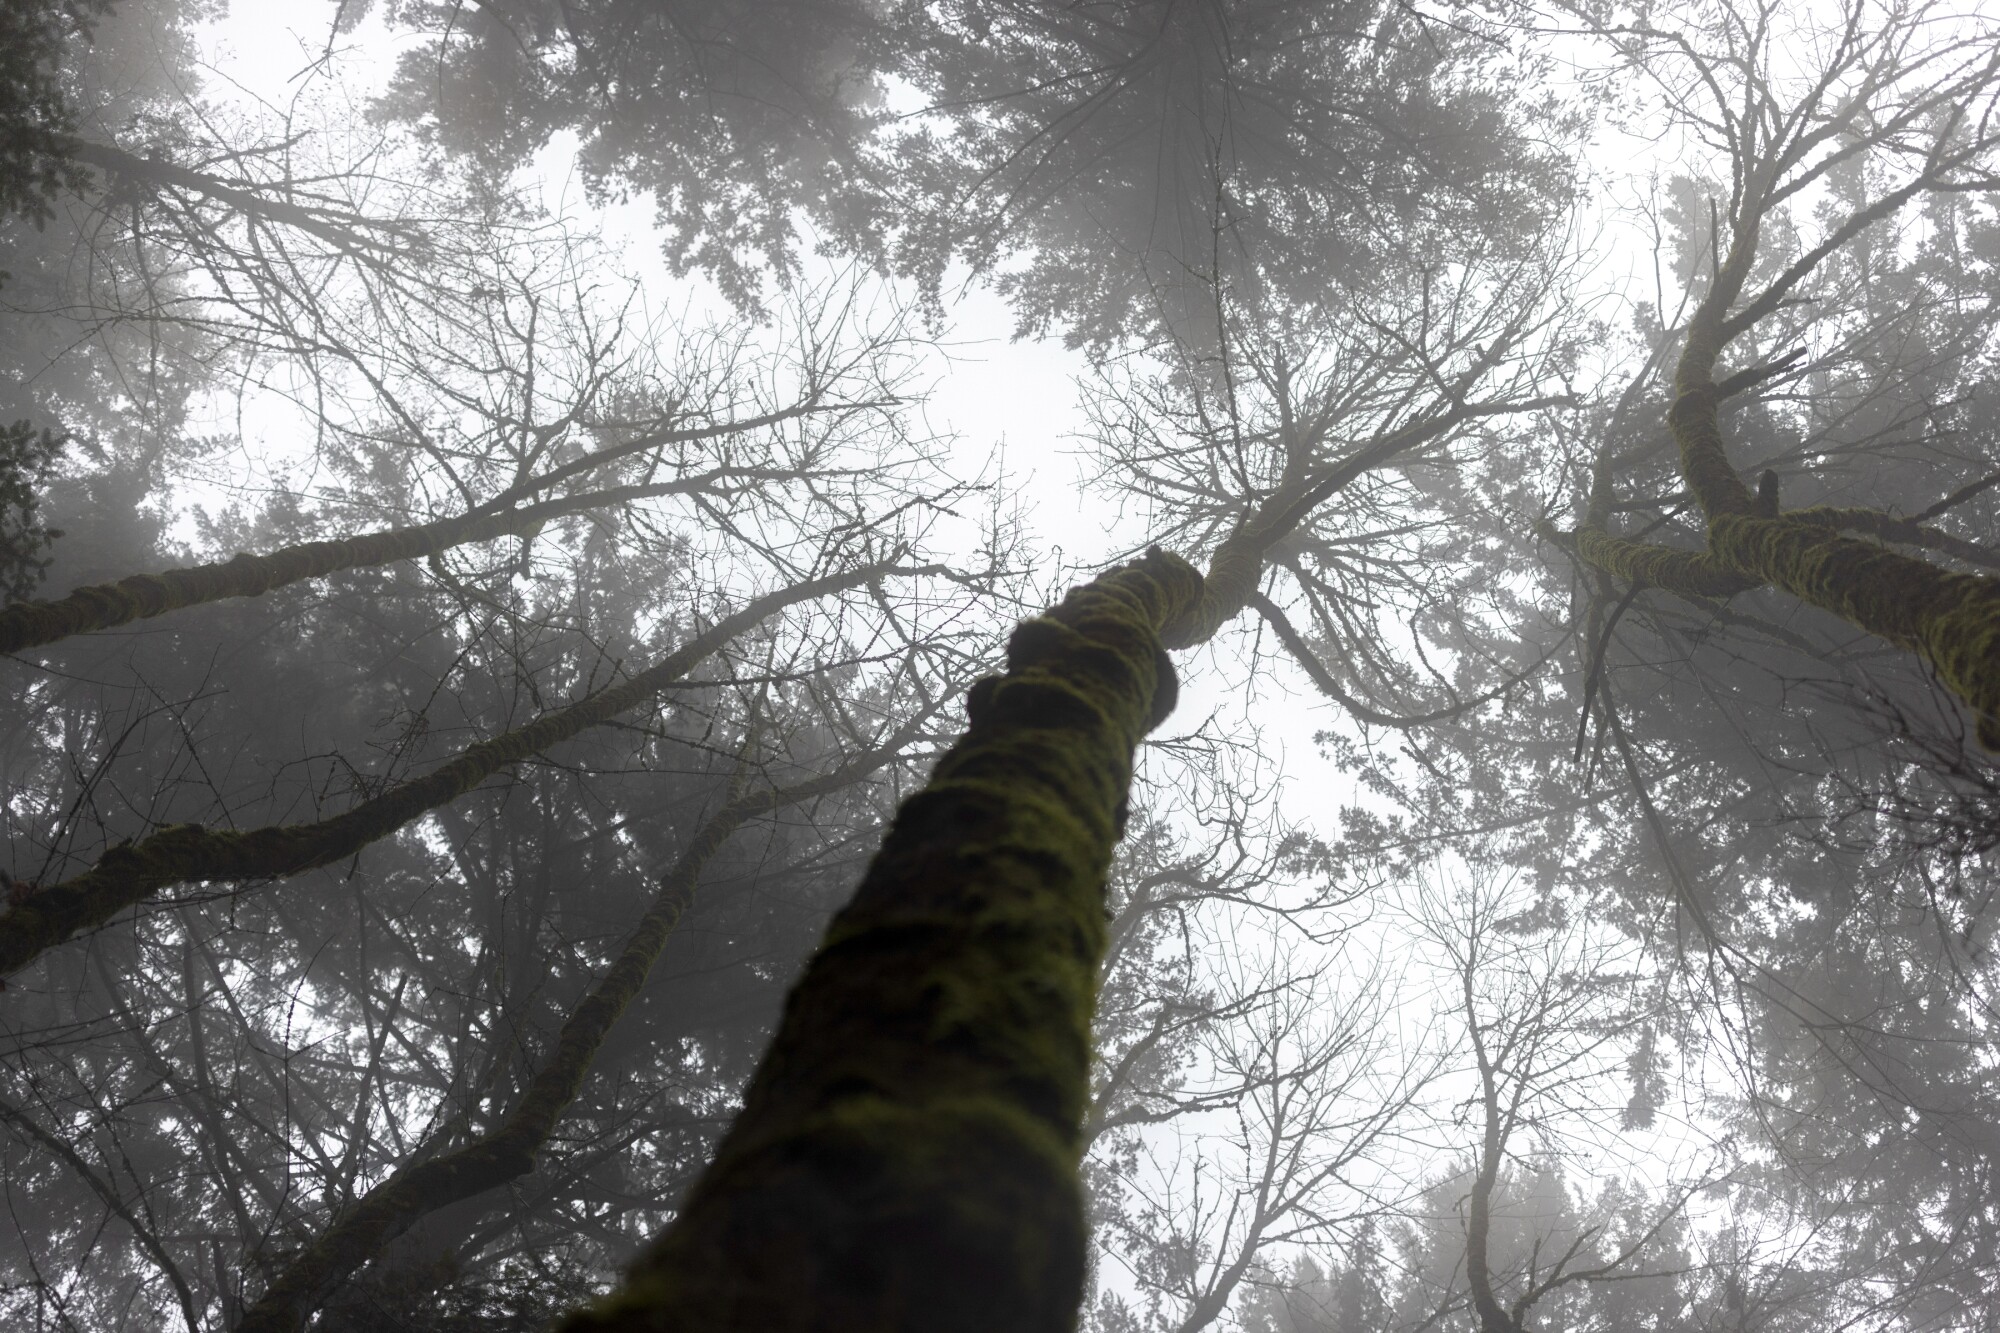 A nature park showing tall trees reaching into a foggy sky